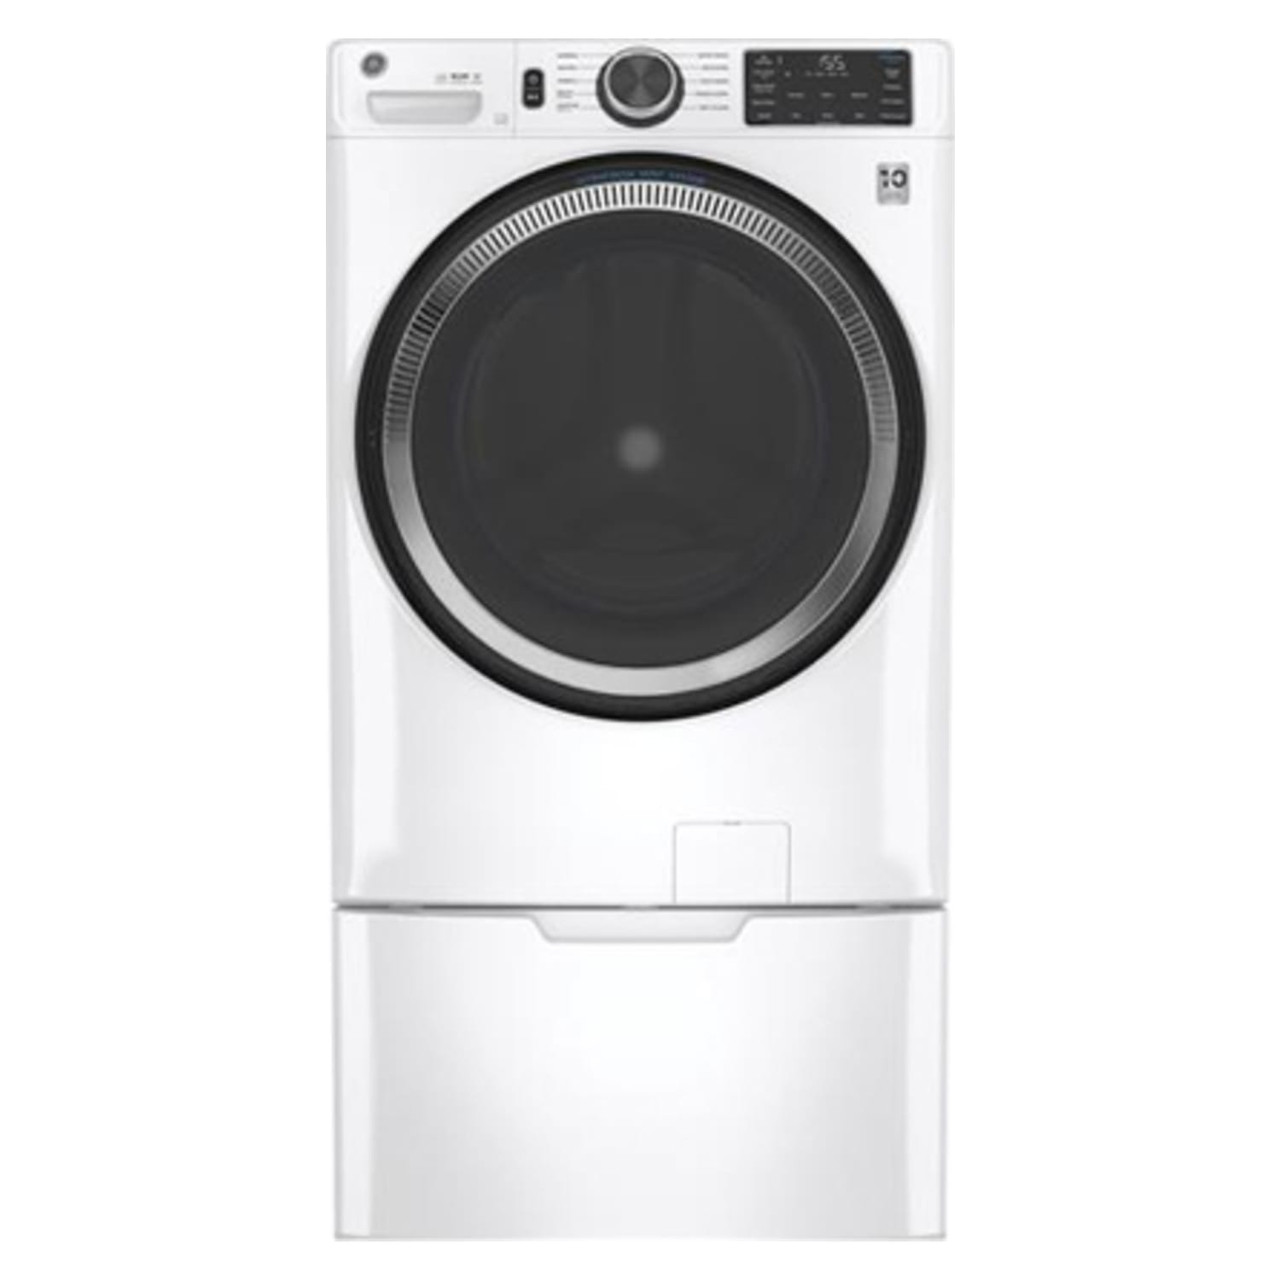 GE® 4.8 cu. ft. Front Load Washer with UltraFresh Vent System - GFW550SSNWW